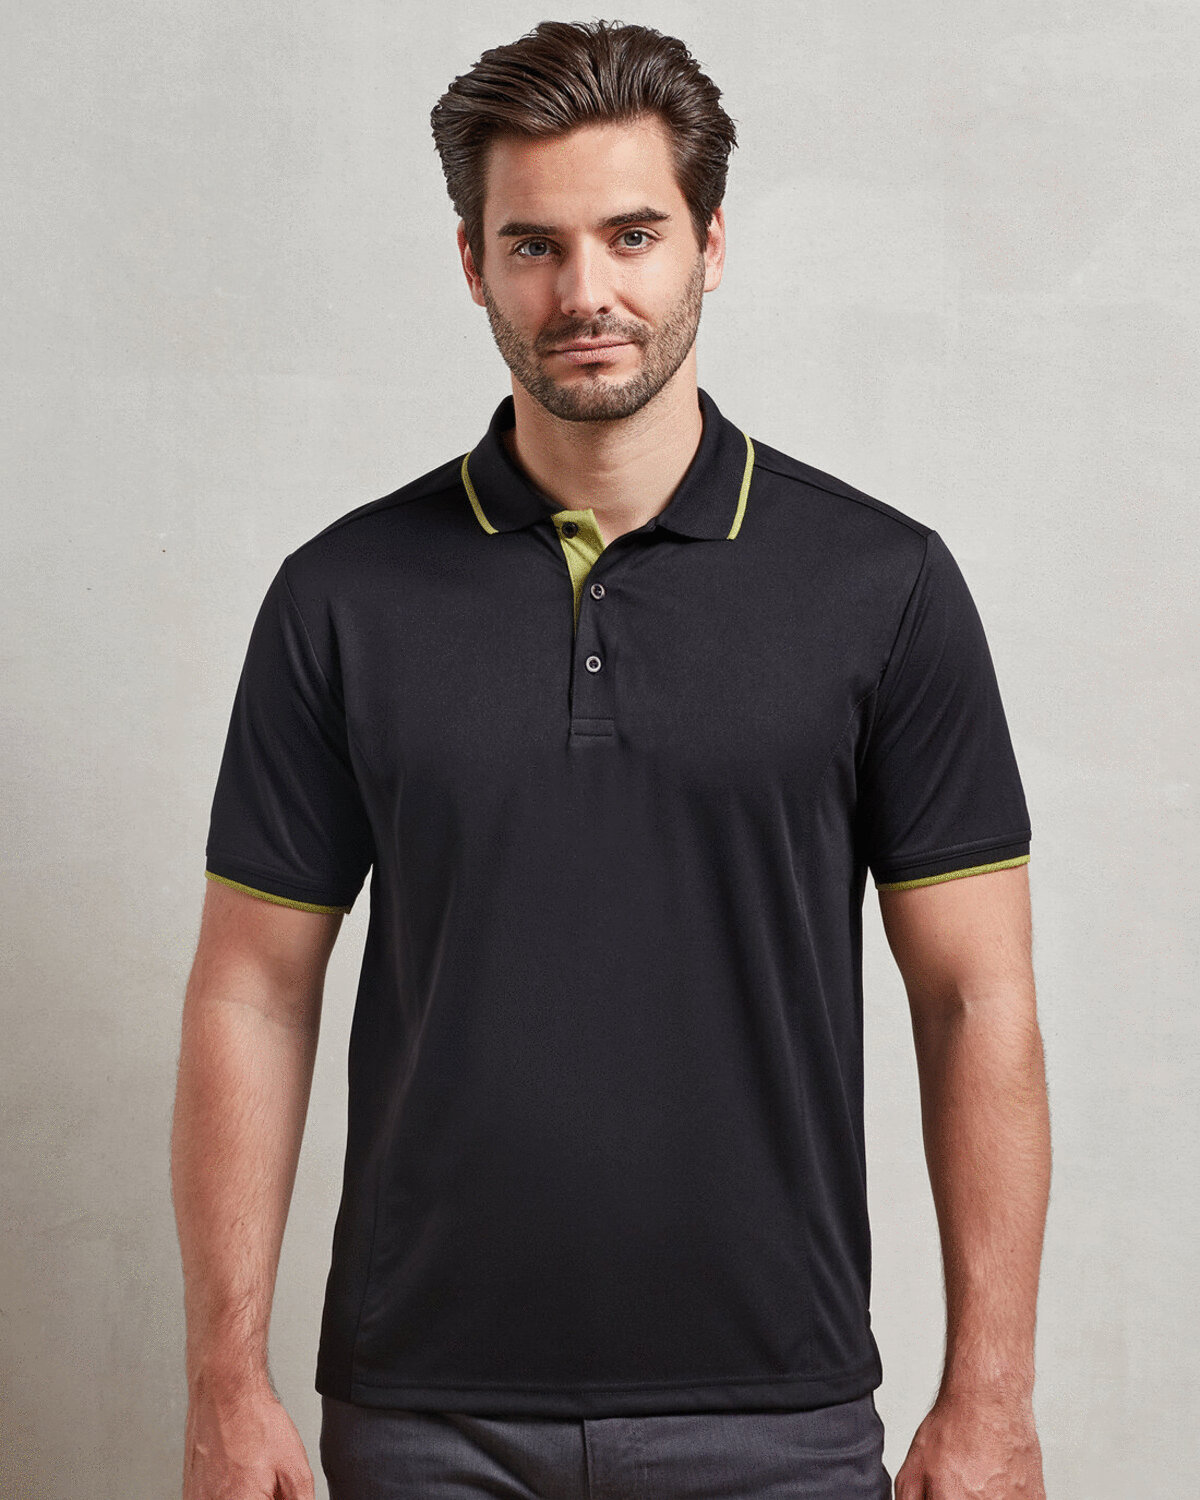 MENS CONTRAST TIPPED COOLCHECKER POLO SHIRT